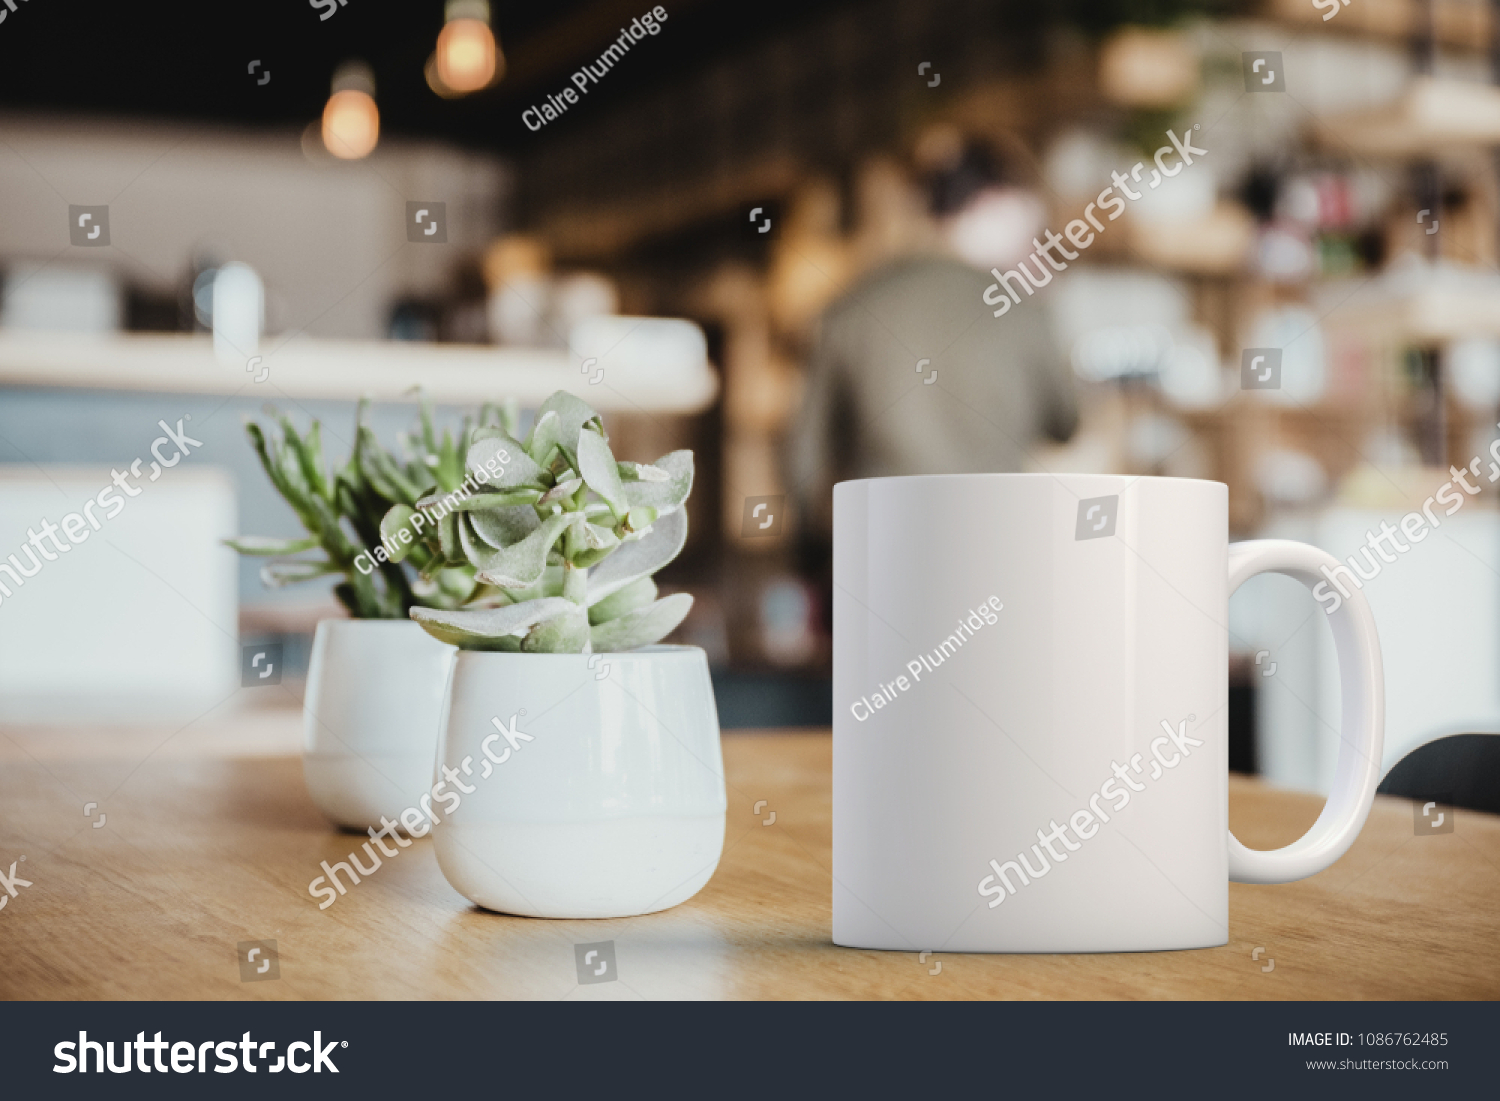 White coffee Mug Mockup set-up in a cafe, next to cactus plants and with blurred background. Great for overlaying your custom quotes and designs for selling mugs. #1086762485